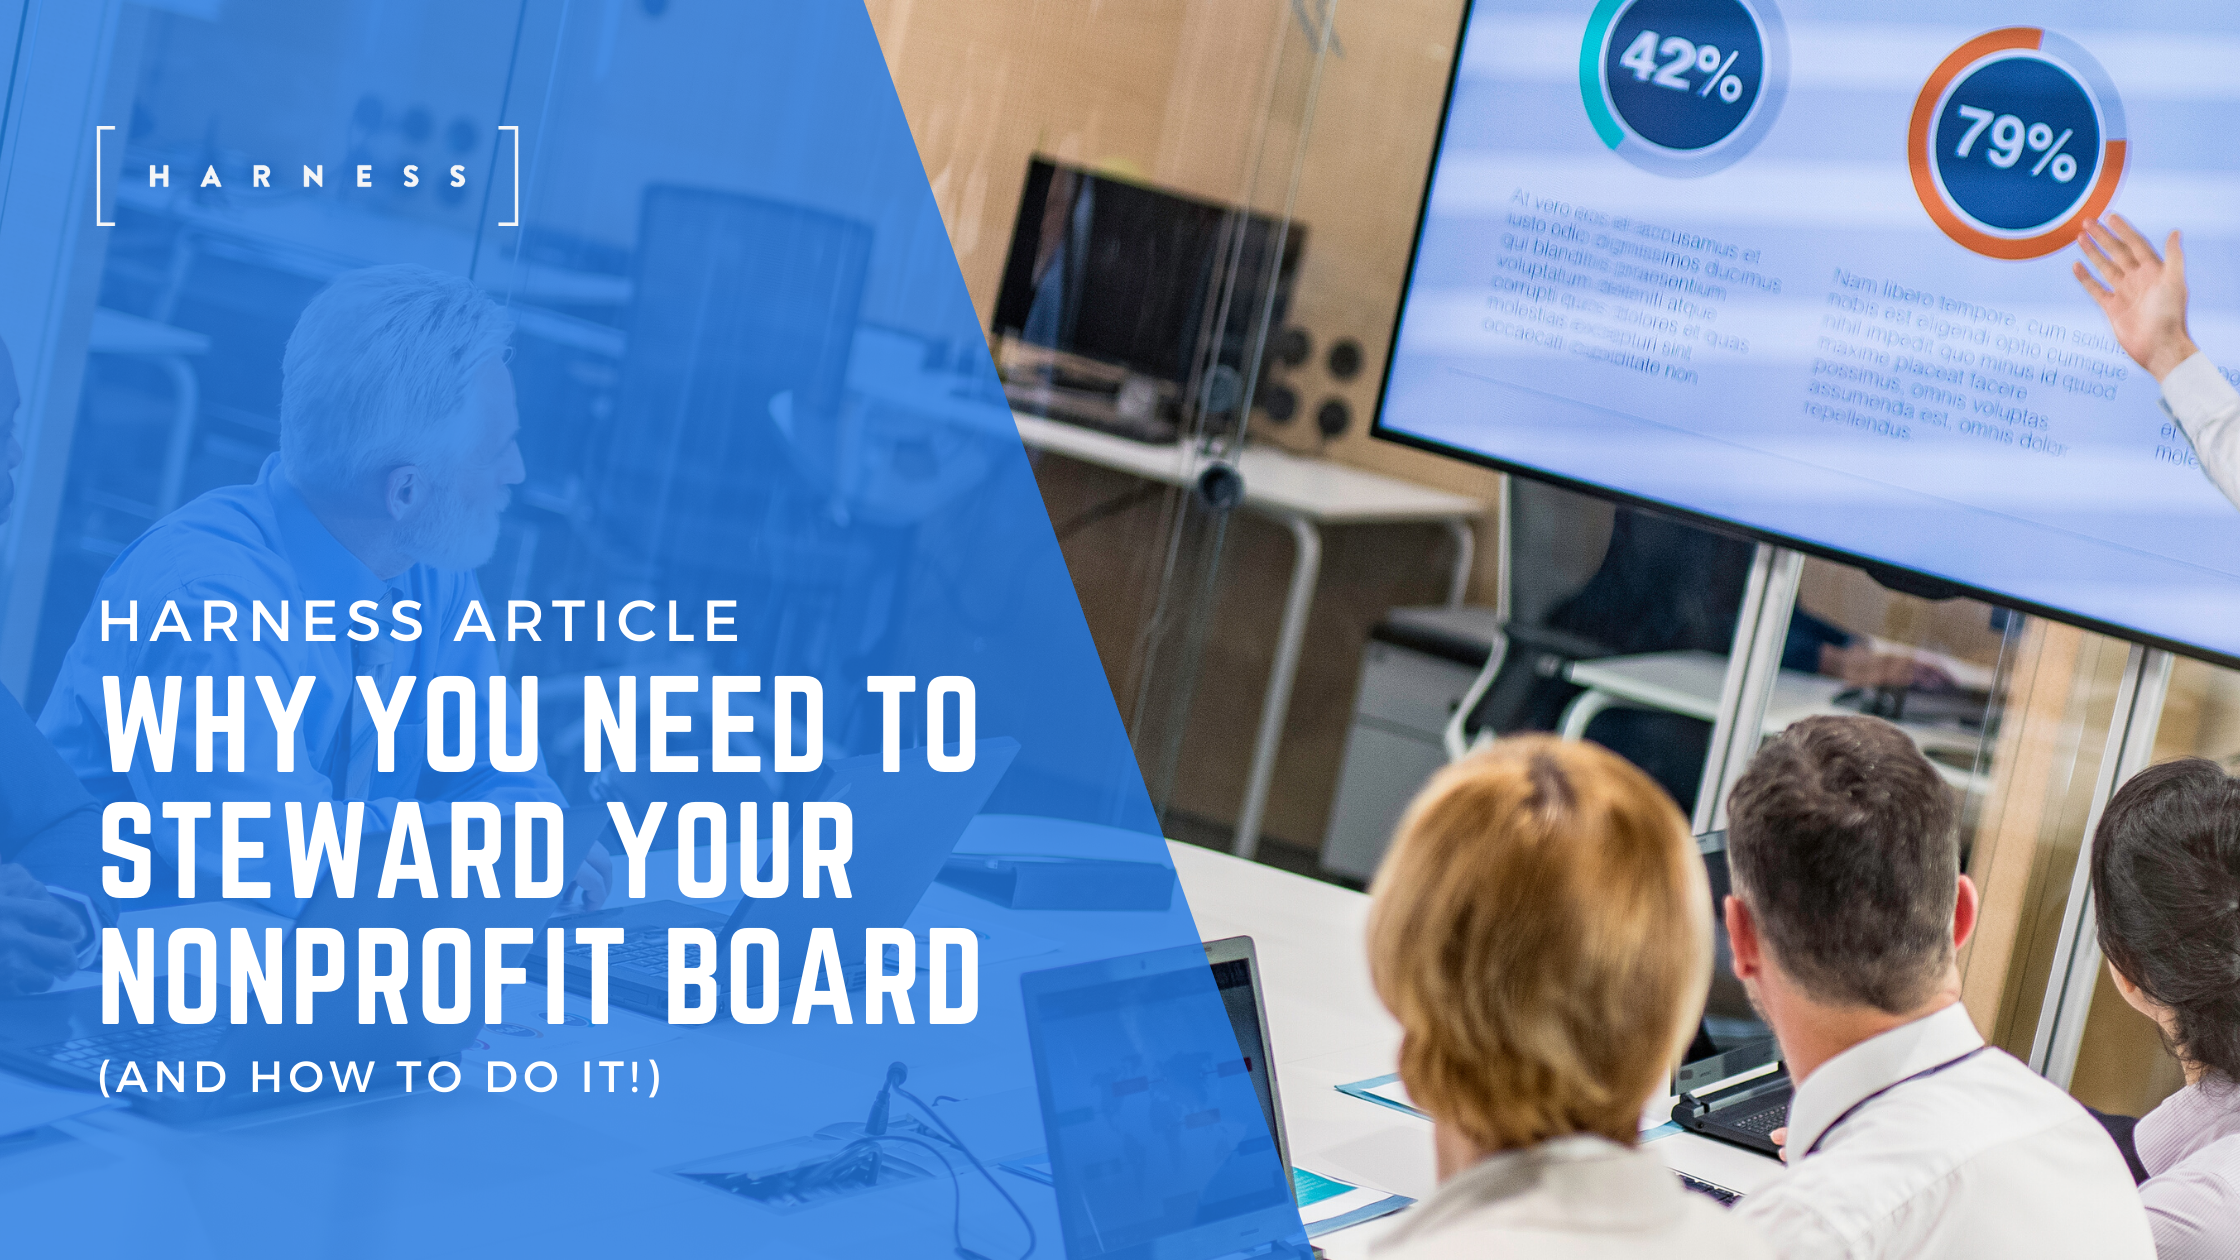 Why you need to steward your nonprofit board (and how to do it!)